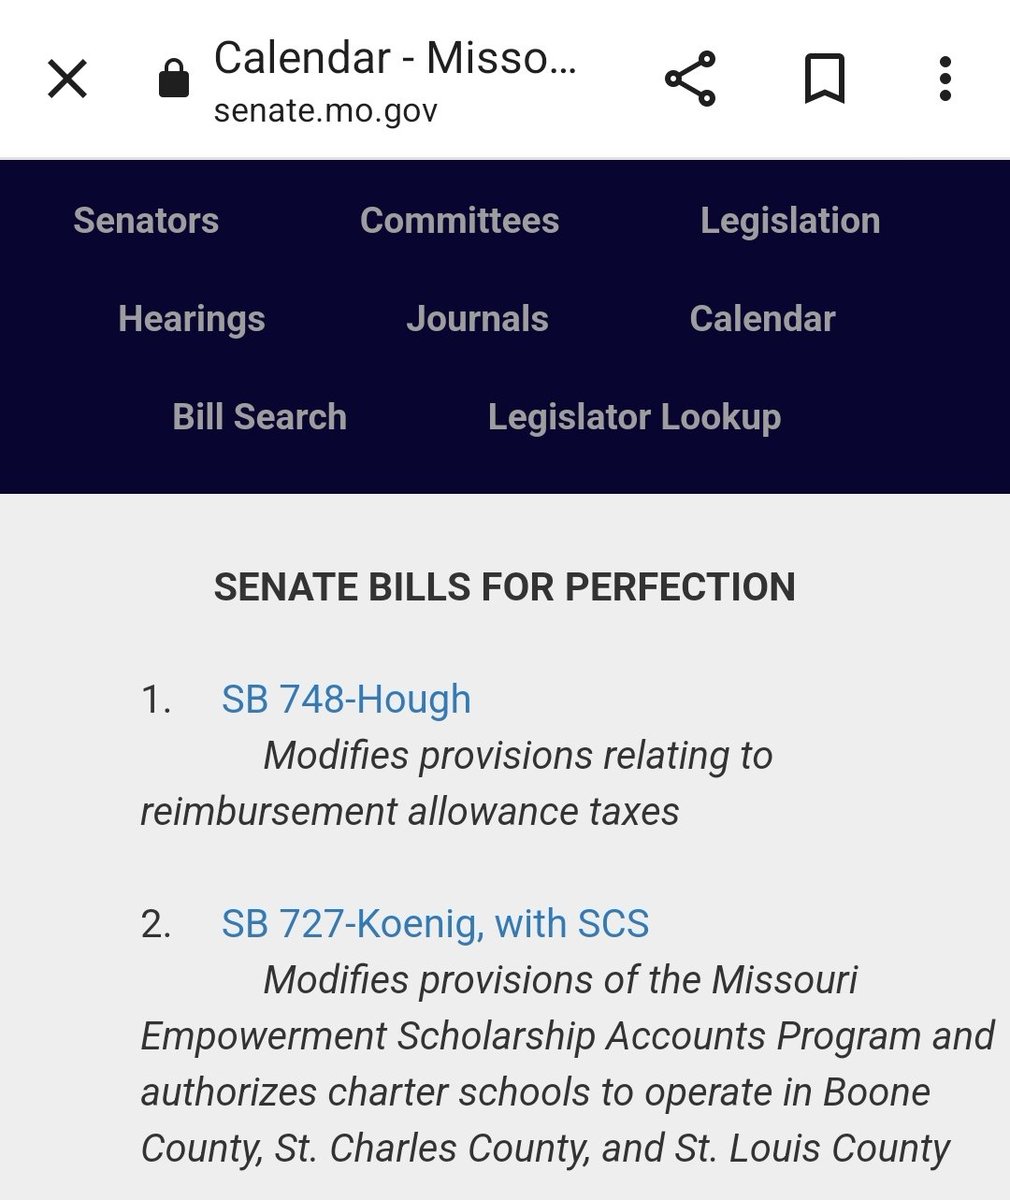 BREAKING: Missouri Senate now has a bill to fund students instead of systems on the perfection calendar. #moleg #SB727